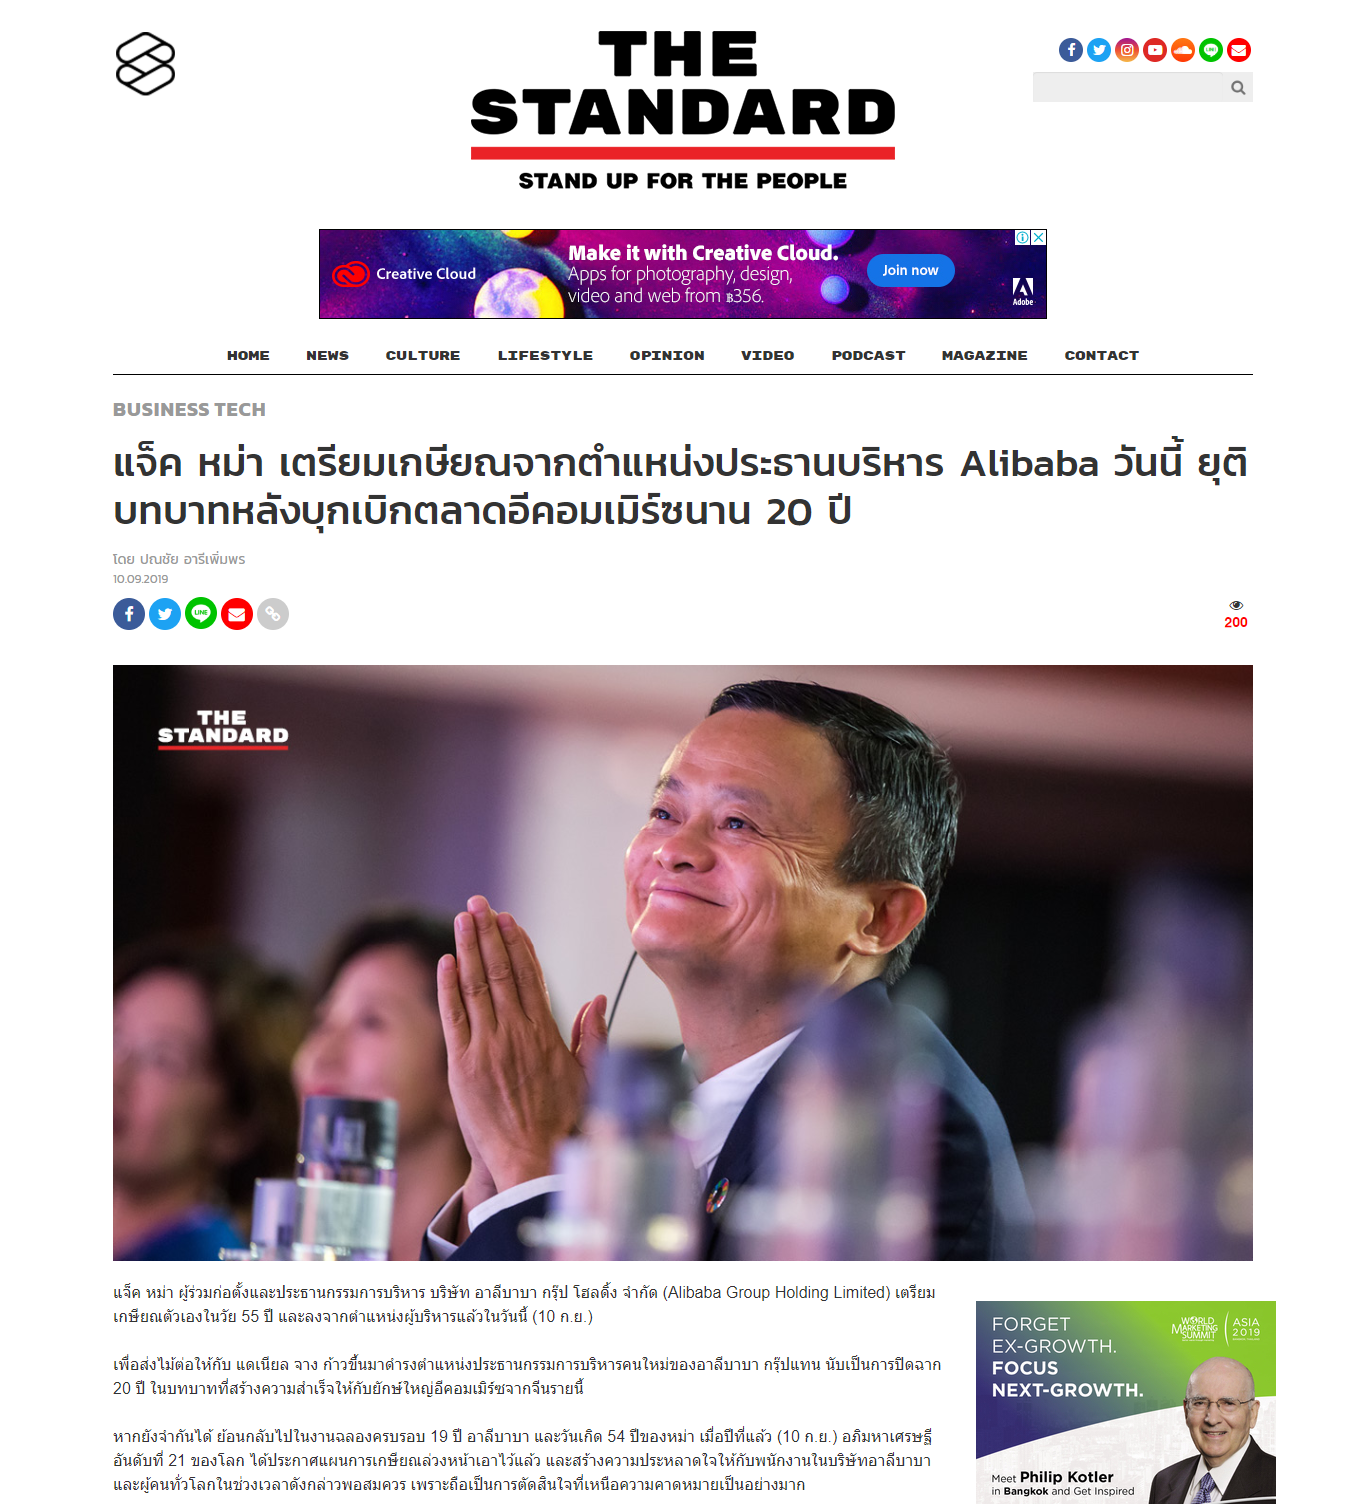 thestandard-co-jack-ma-retires-from-alibaba-2019-09-12-09_17_48